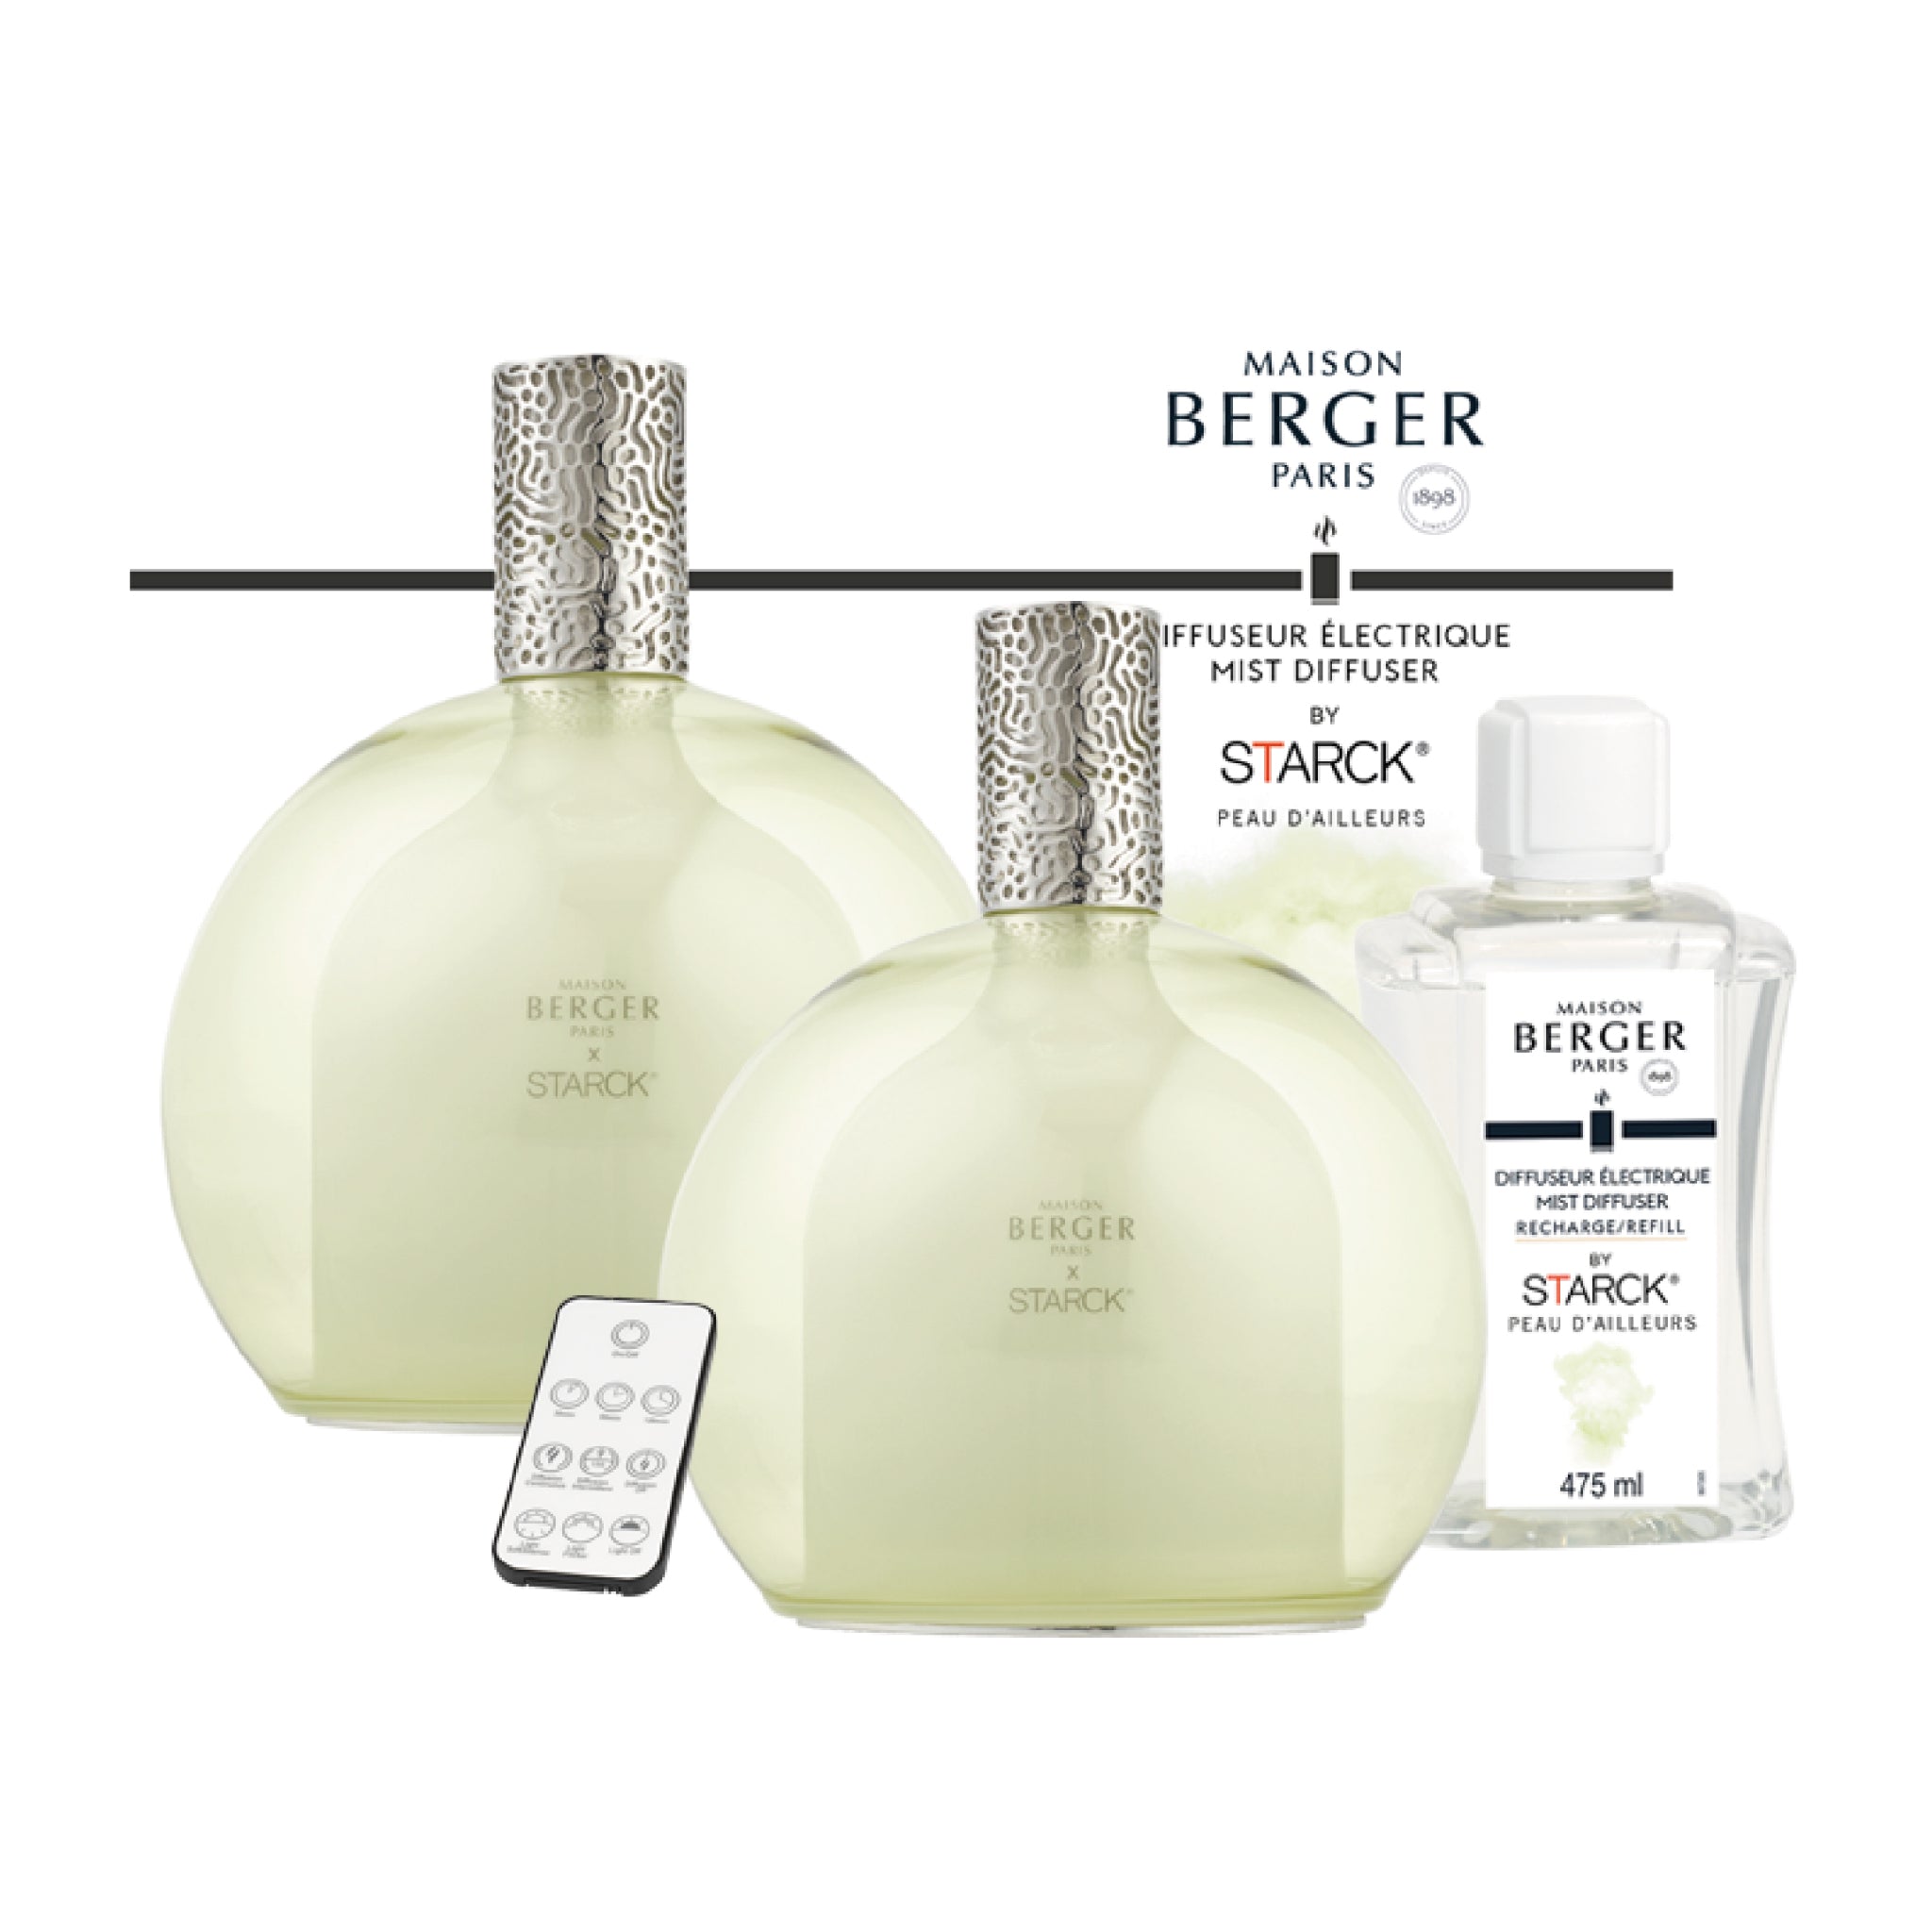 Grey Lamp Berger Gift Pack by Starck - Maison Berger Paris • Maison Berger  Paris UK